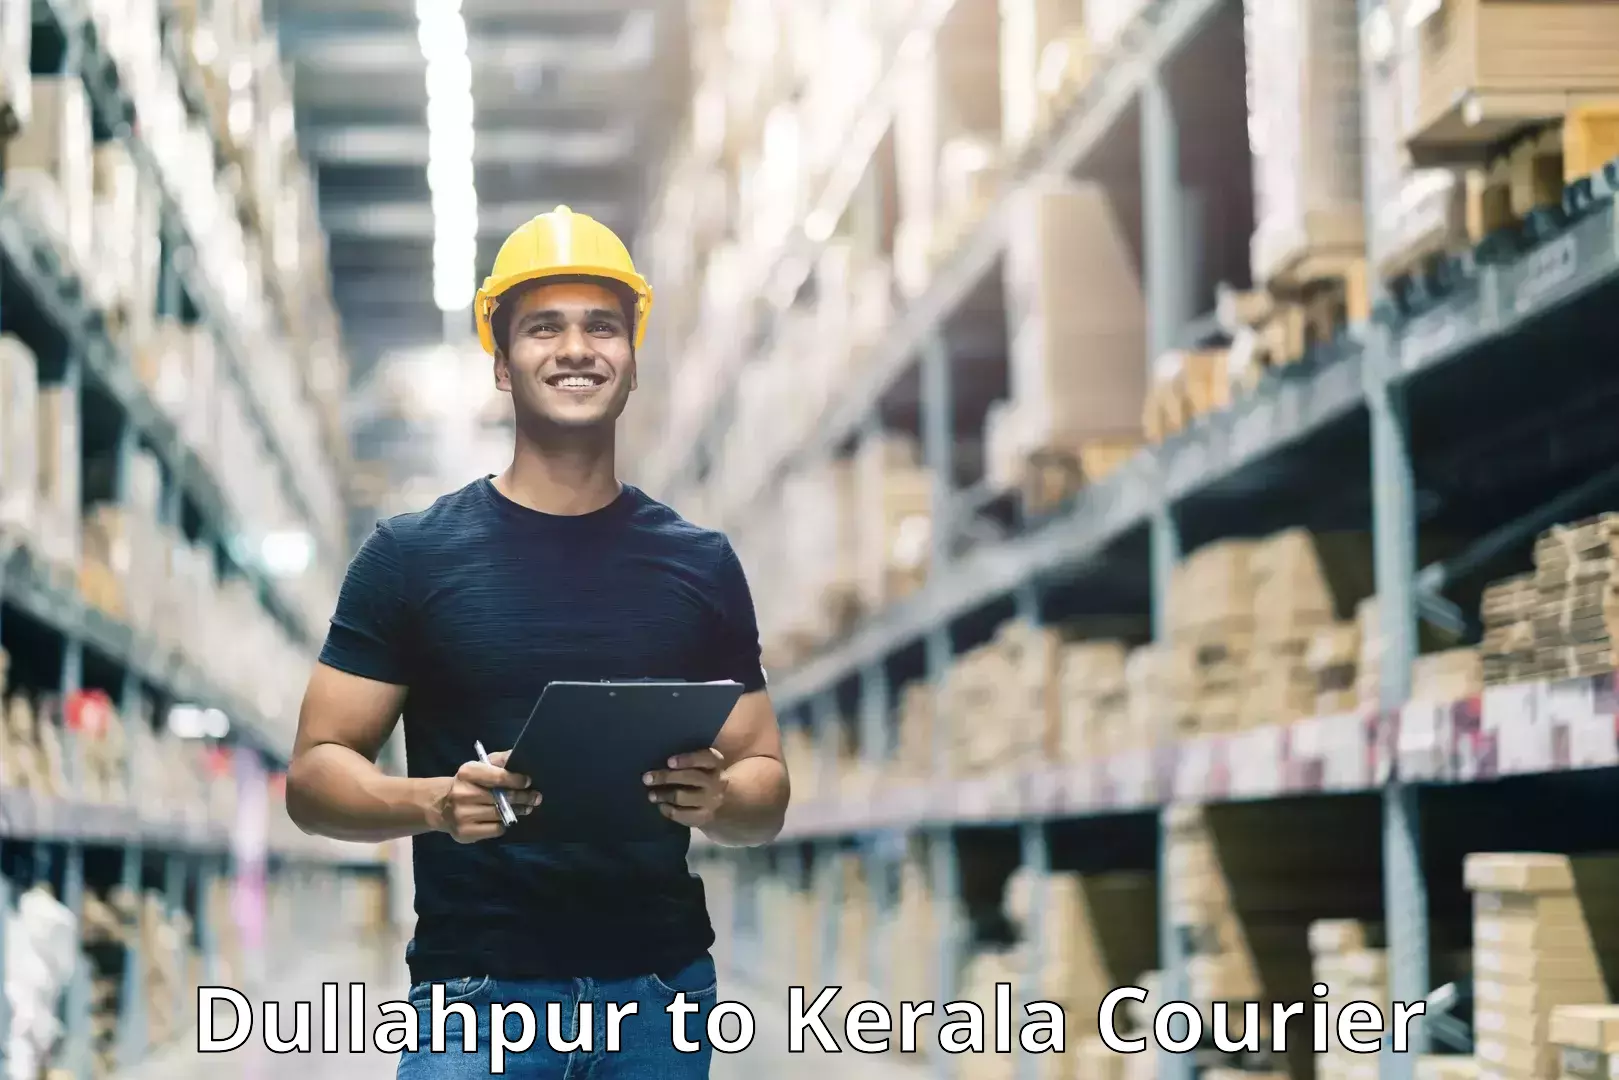 High-efficiency logistics Dullahpur to Cochin University of Science and Technology